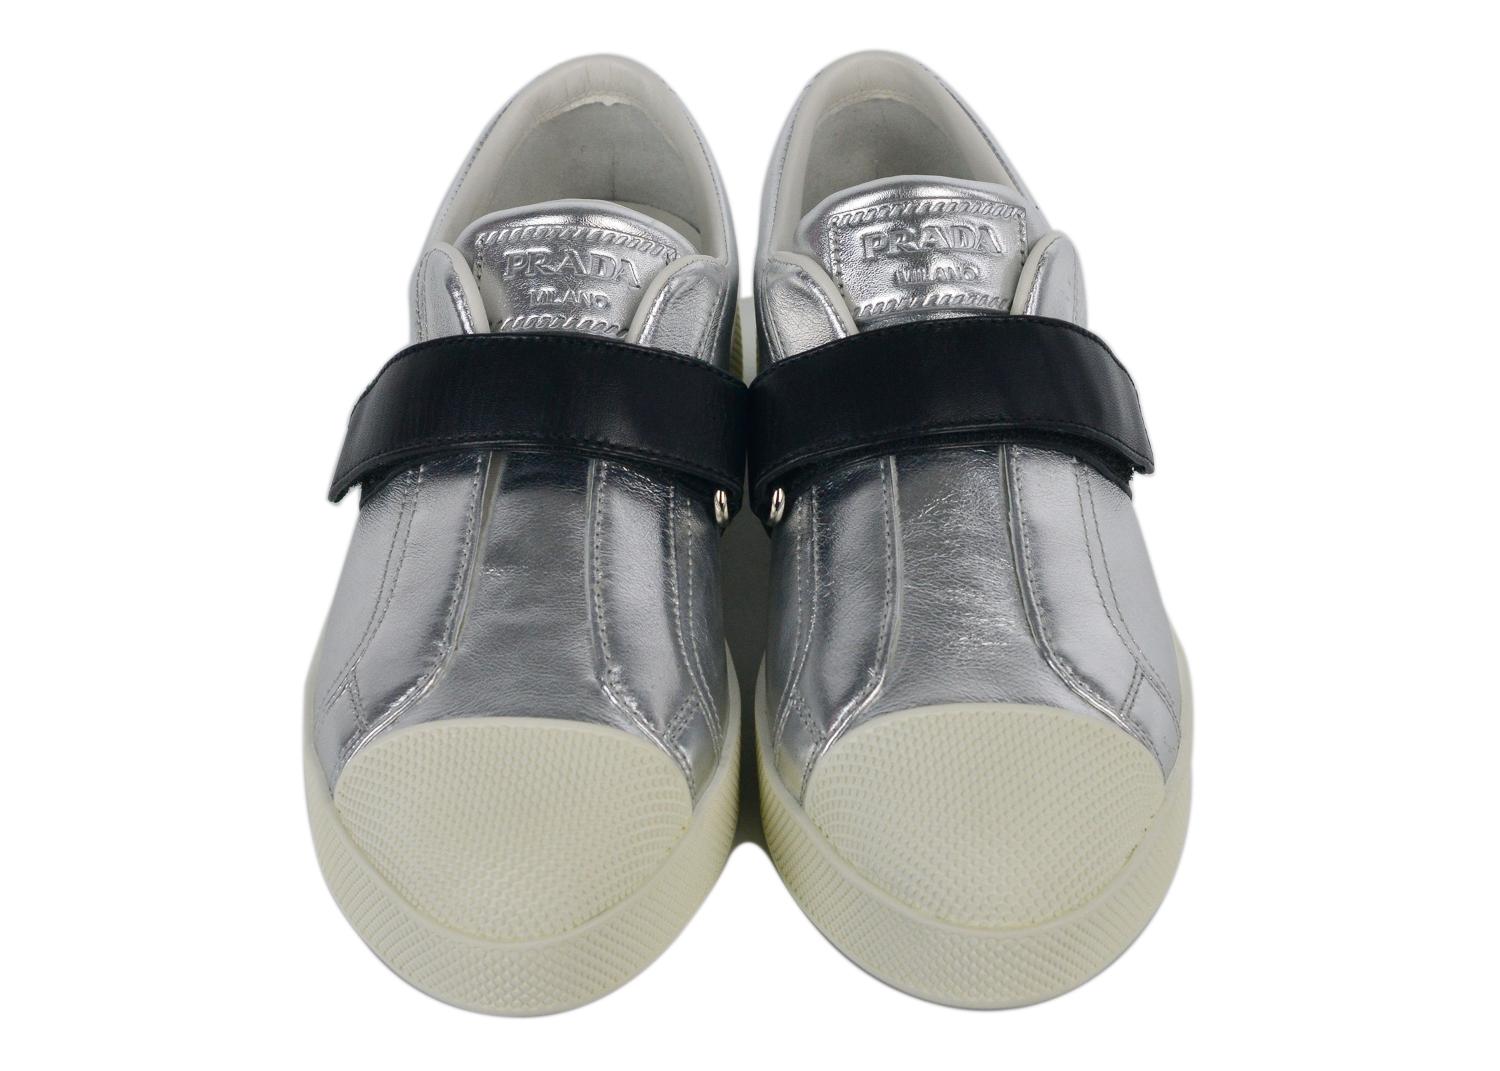 Incredible silver leather sneakers from Prada featuring a round rubber toe,  a brand embossed insole, a hook and loop style and a rubber sole. Prada takes the classic low-top design and gives it a contemporary revamp with this pair of white textured